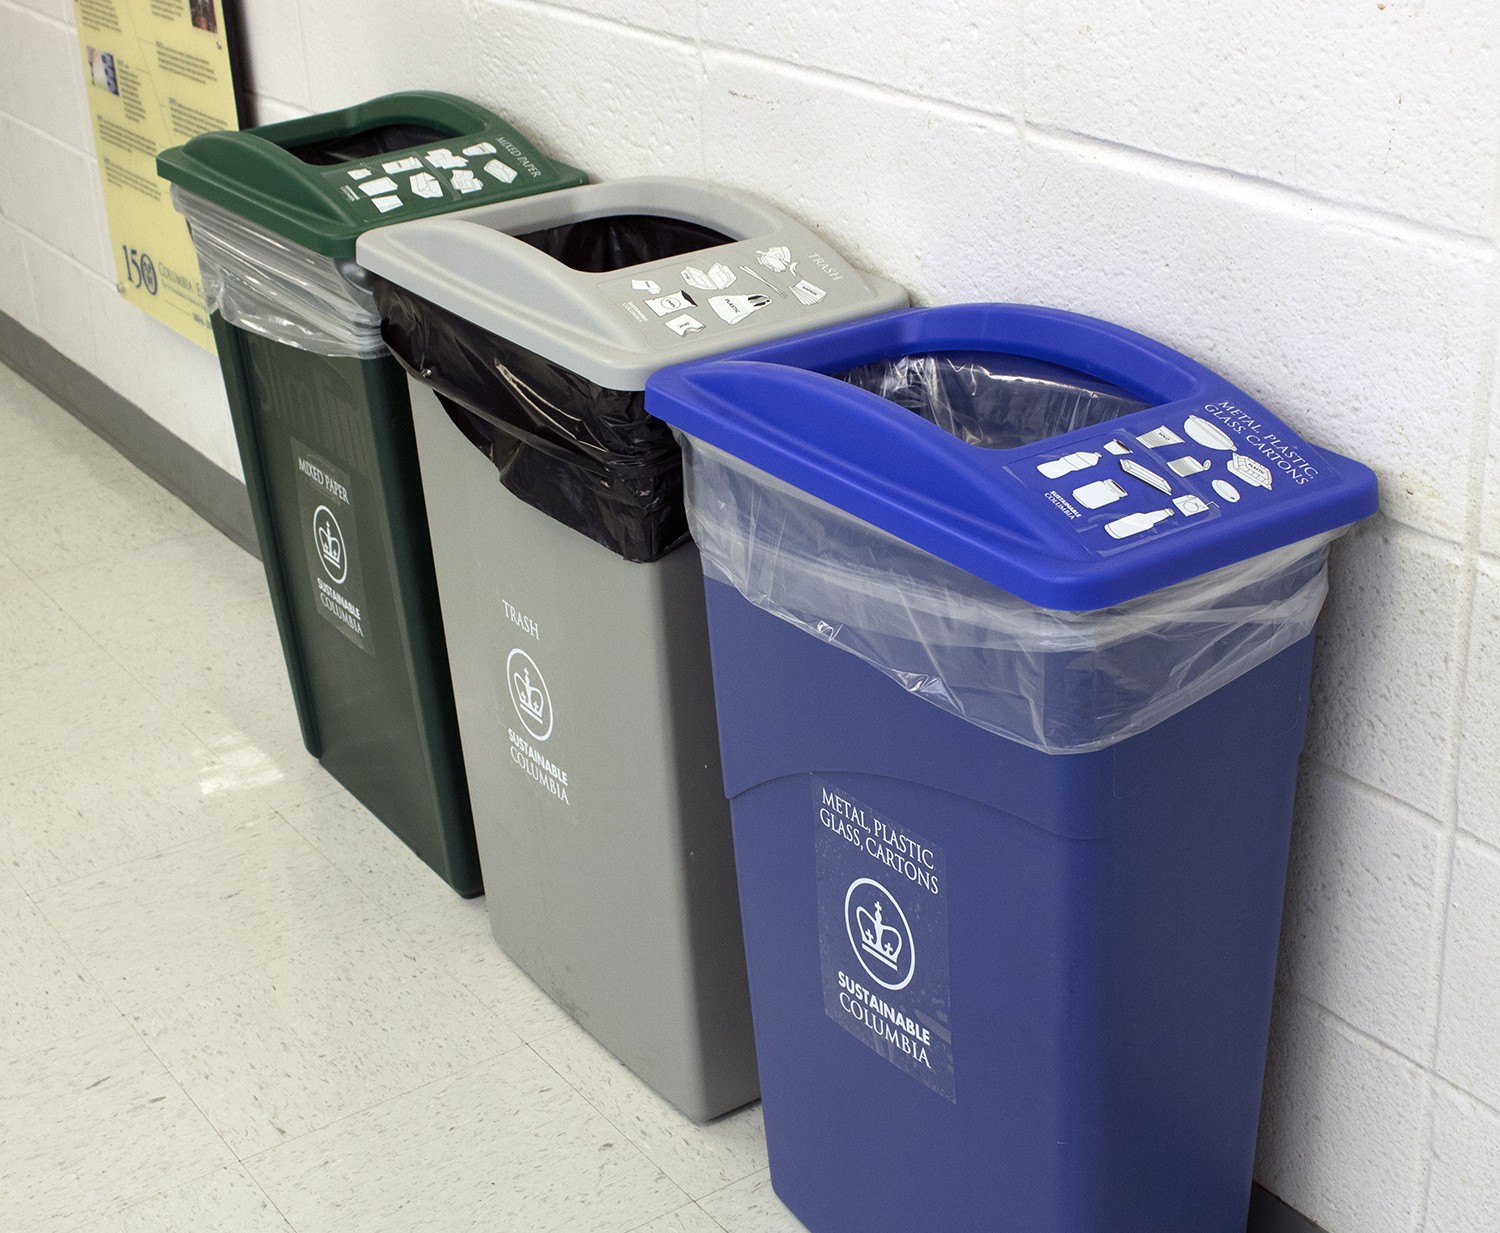 New recycling bin signage in Mudd Hall